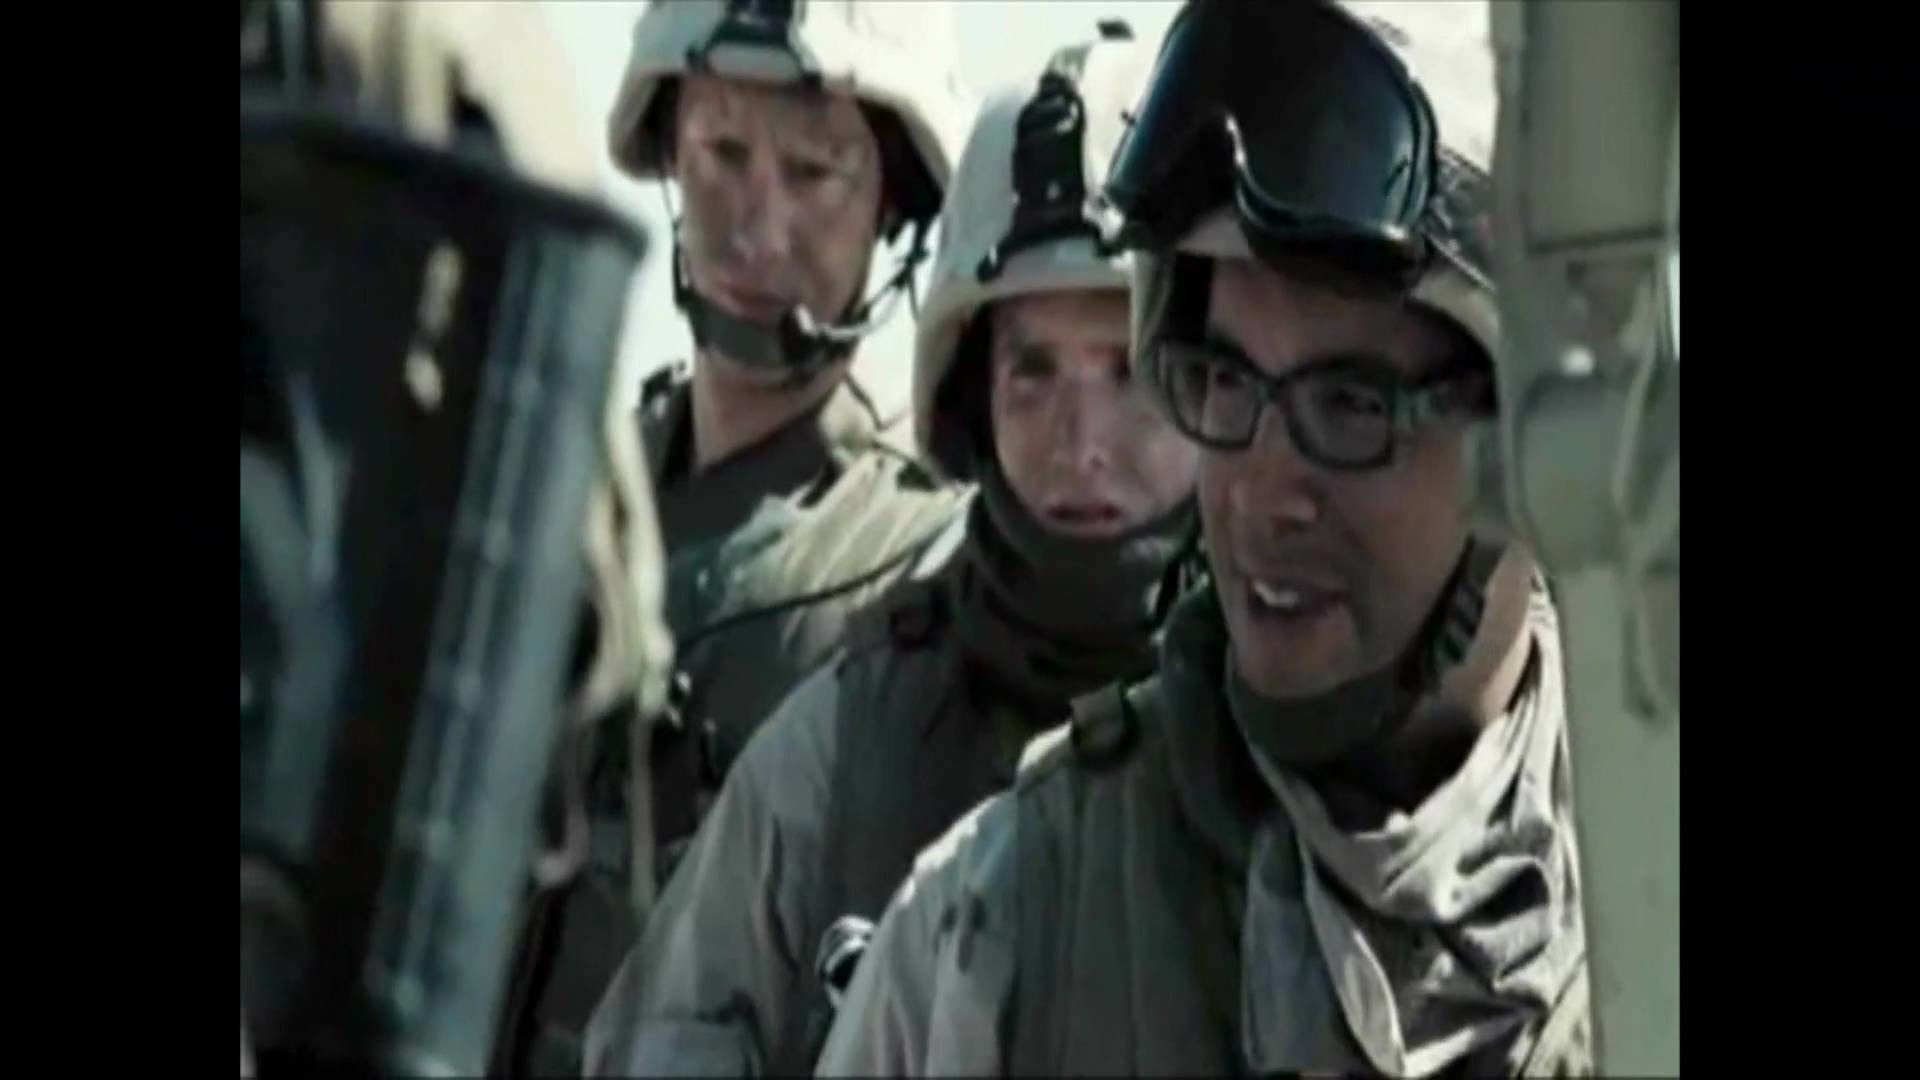 1920x1080 Generation Kill "How Does it Feel to Be Dead?"